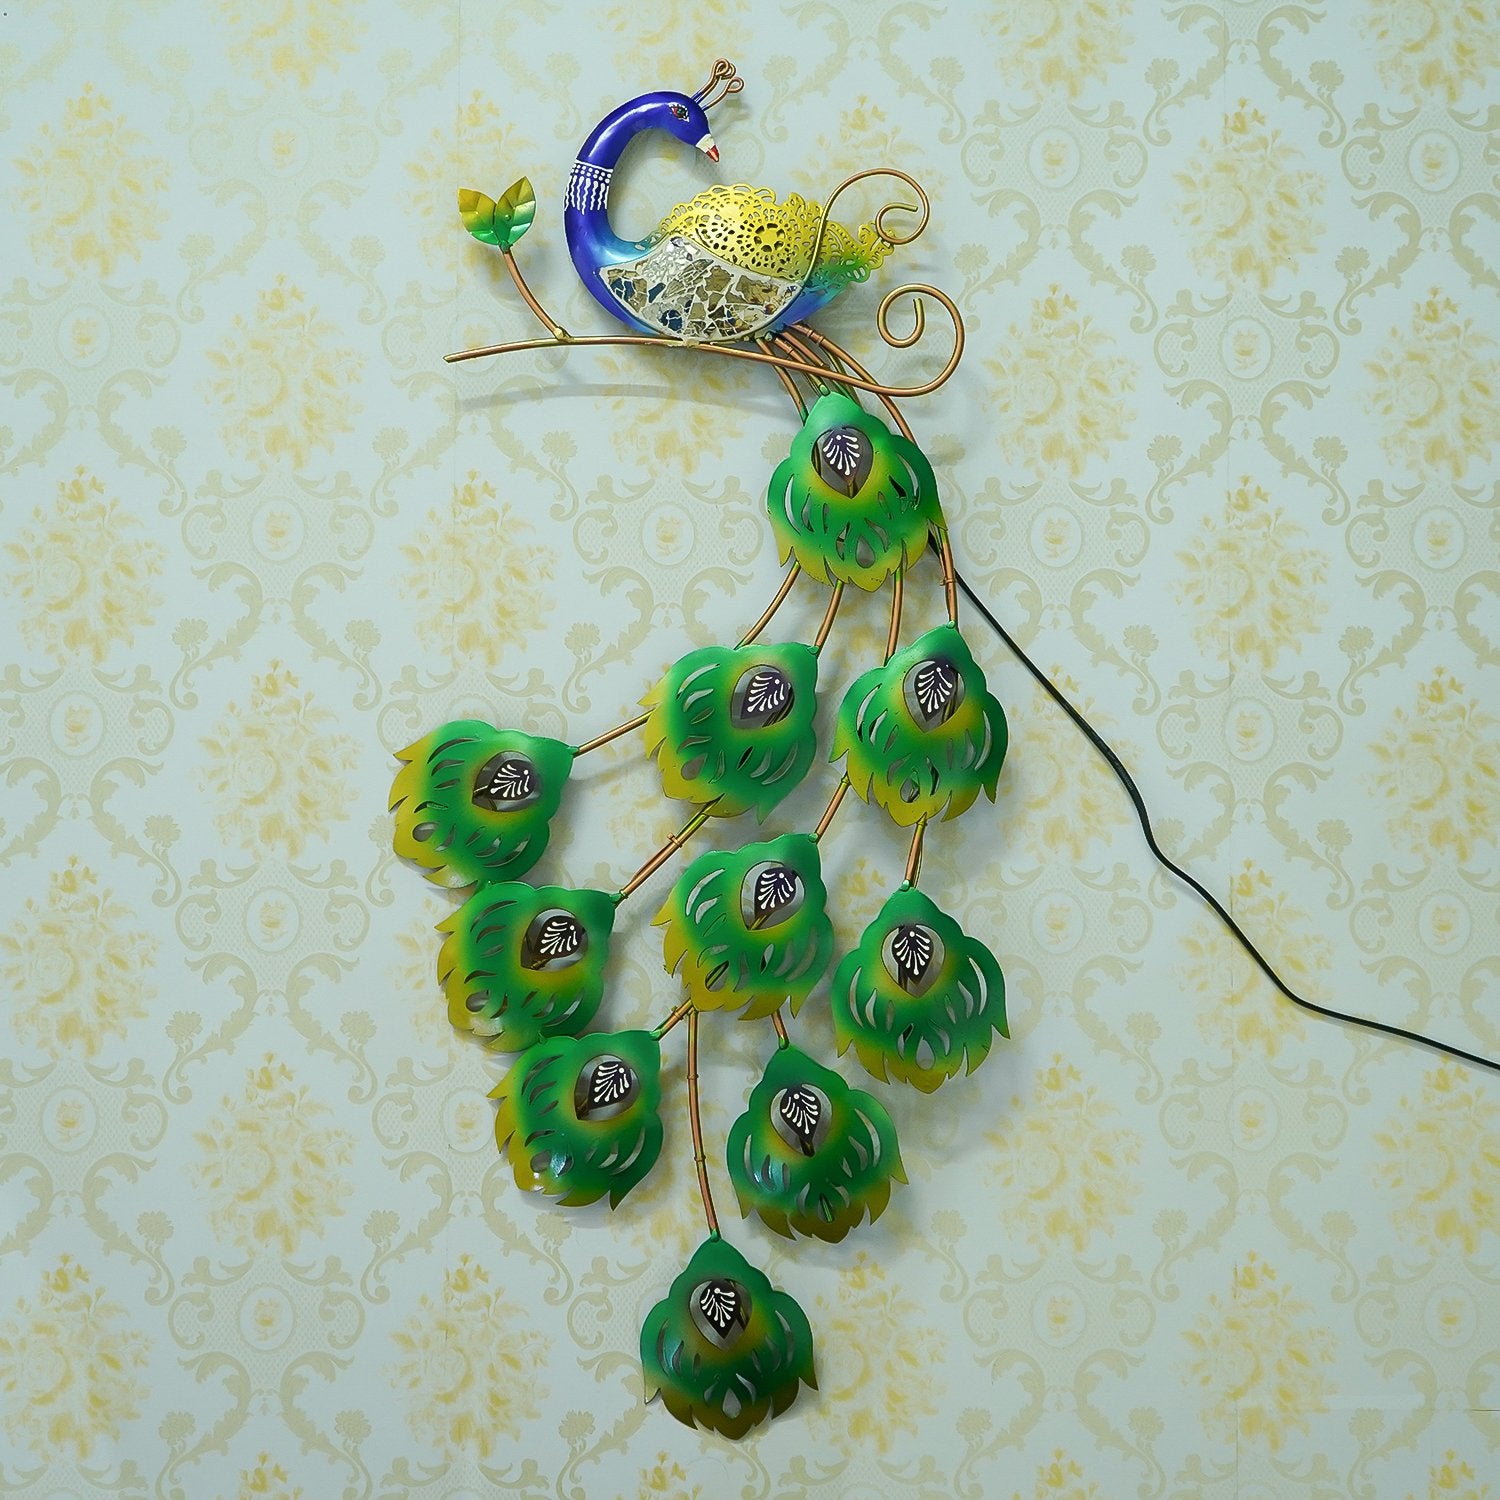 Colorful Dancing Peacock Handcrafted Iron Wall Hanging with background LED's (Blue, Green and Golden)